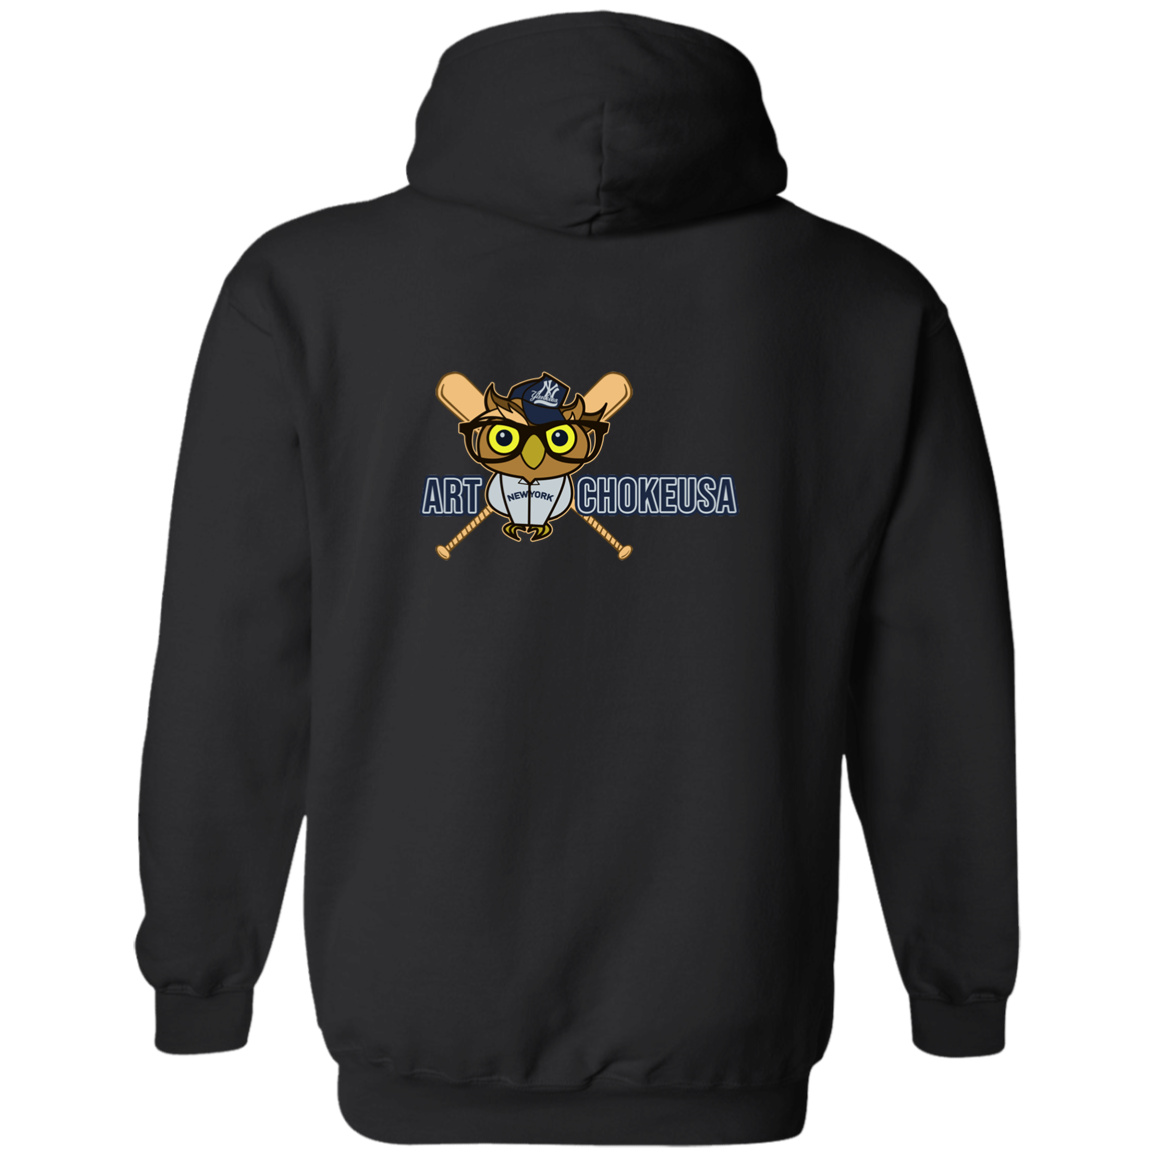 ArtichokeUSA Character and Font design. New York Owl. NY Yankees Fan Art. Let's Create Your Own Team Design Today. Zip Up Hooded Sweatshirt